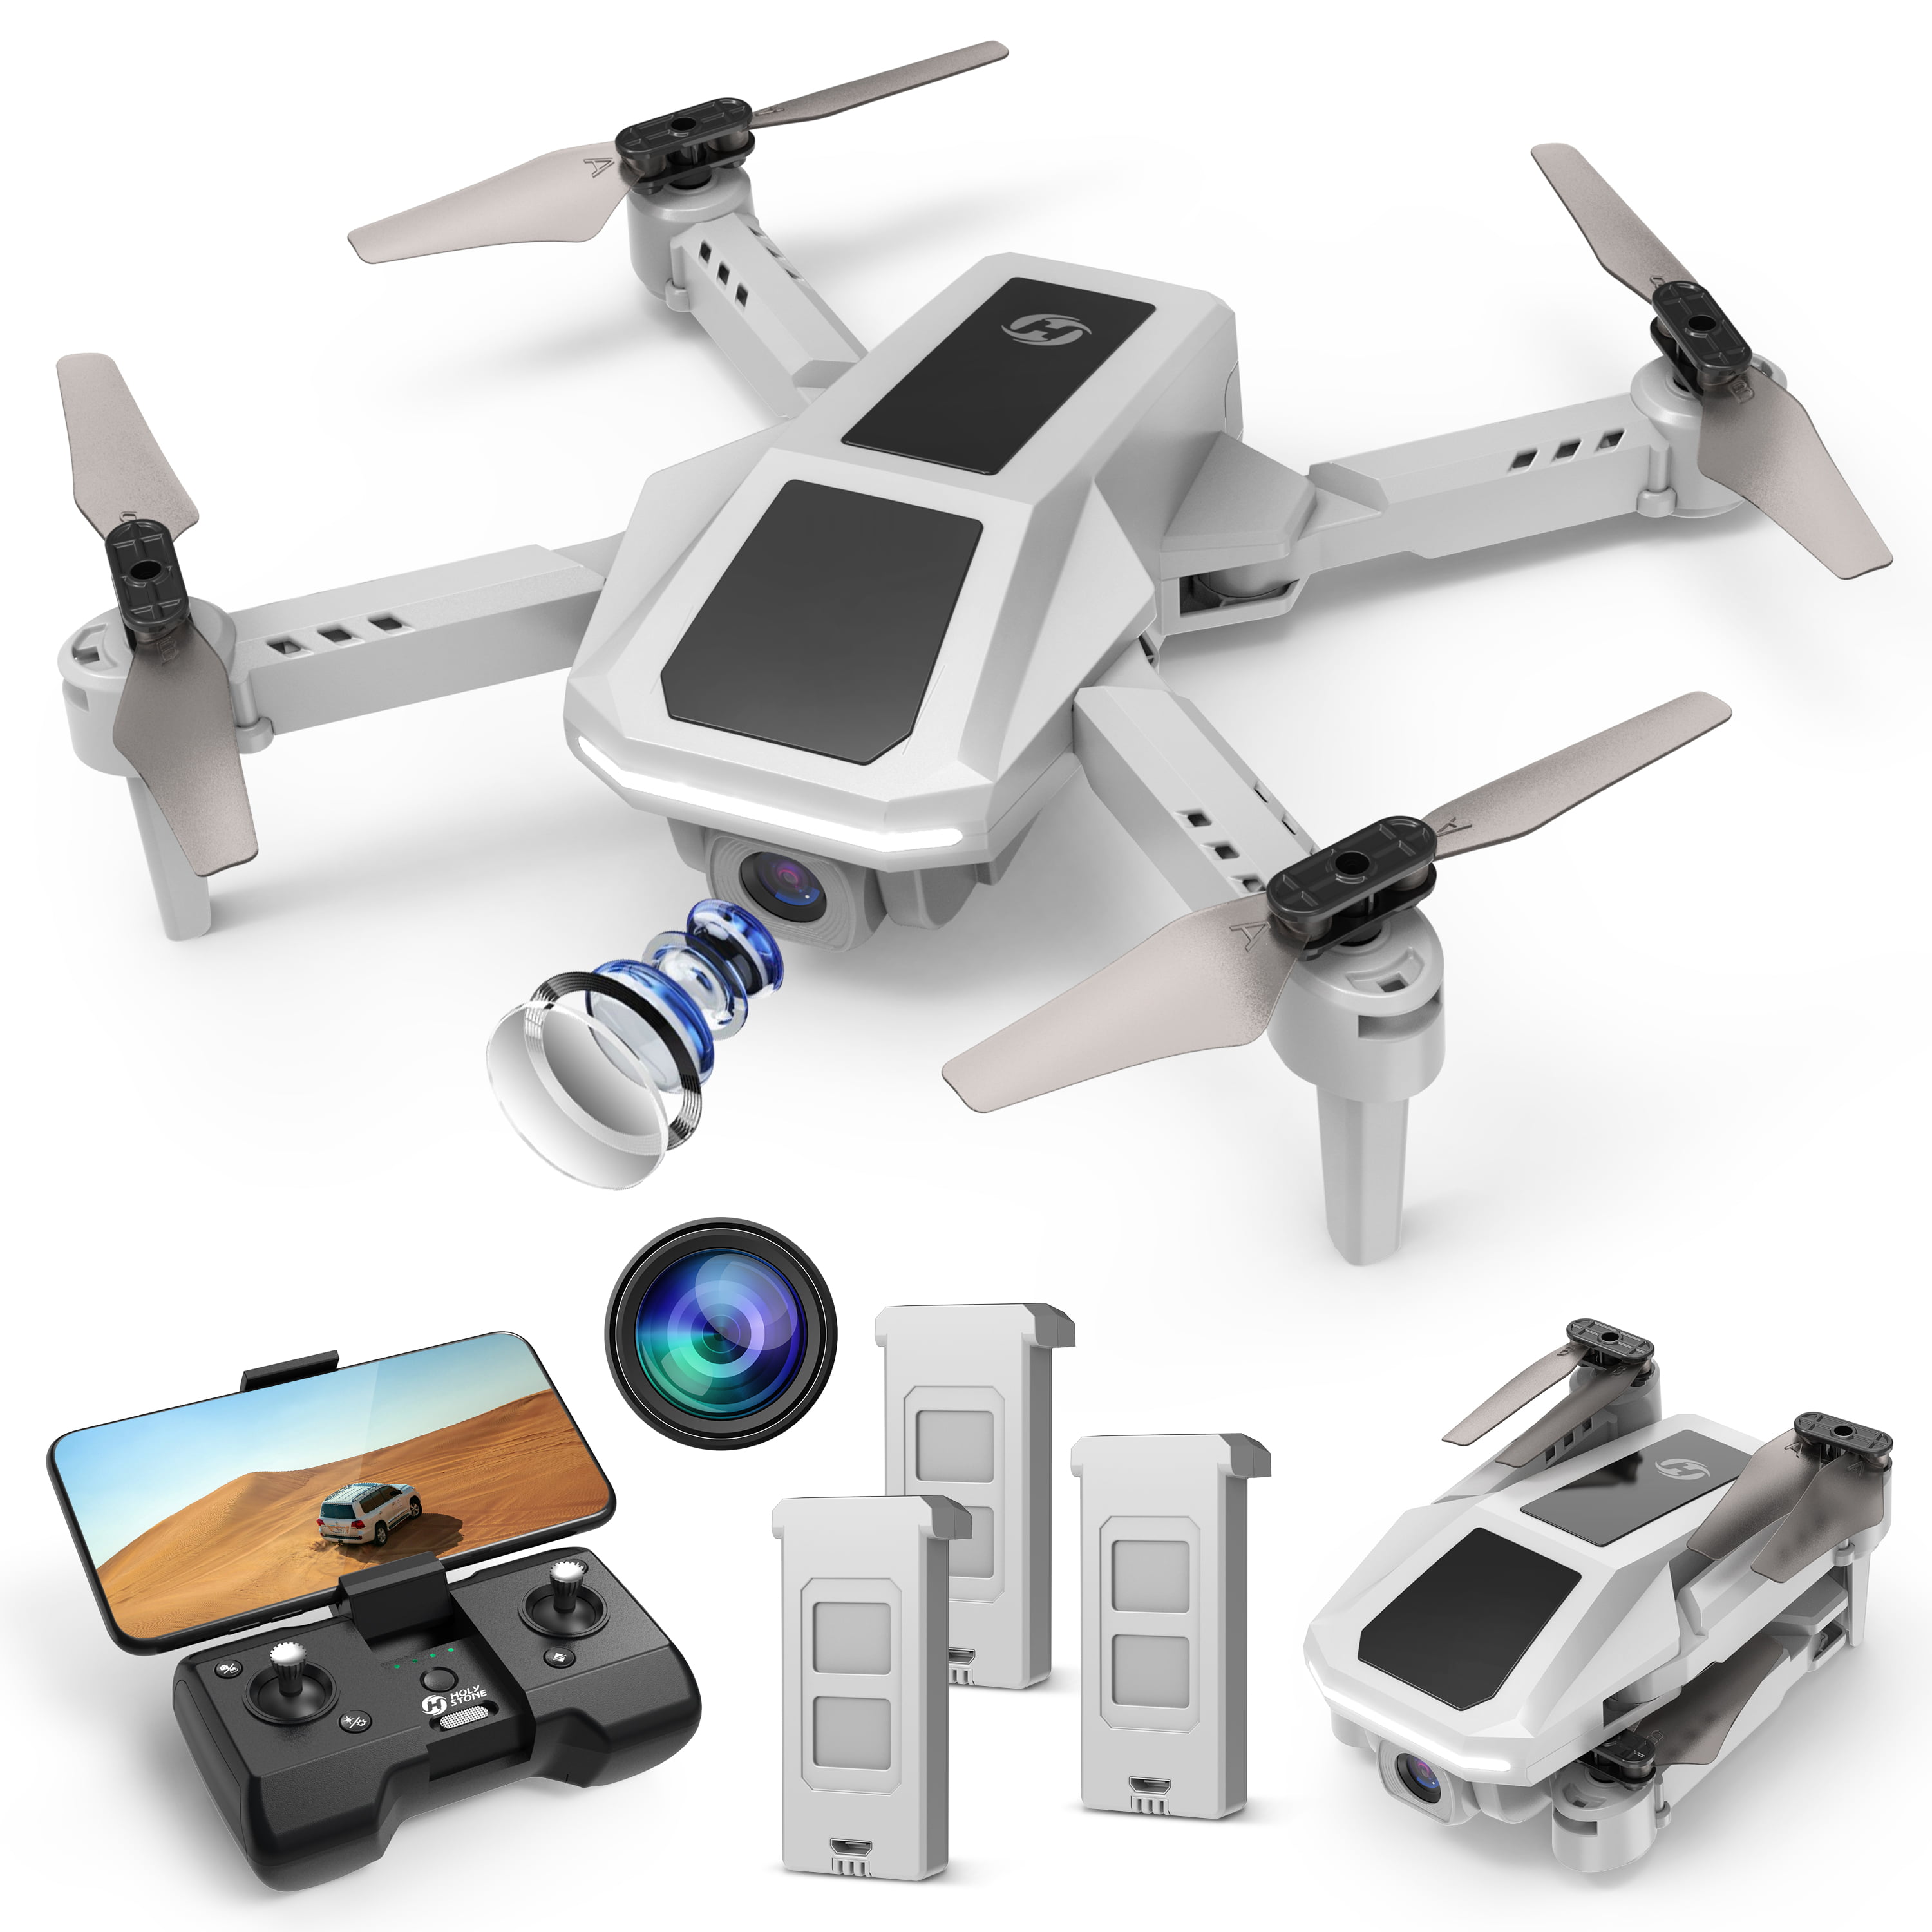 Foldable Quadcopter with 1080P Camera, Voice Control